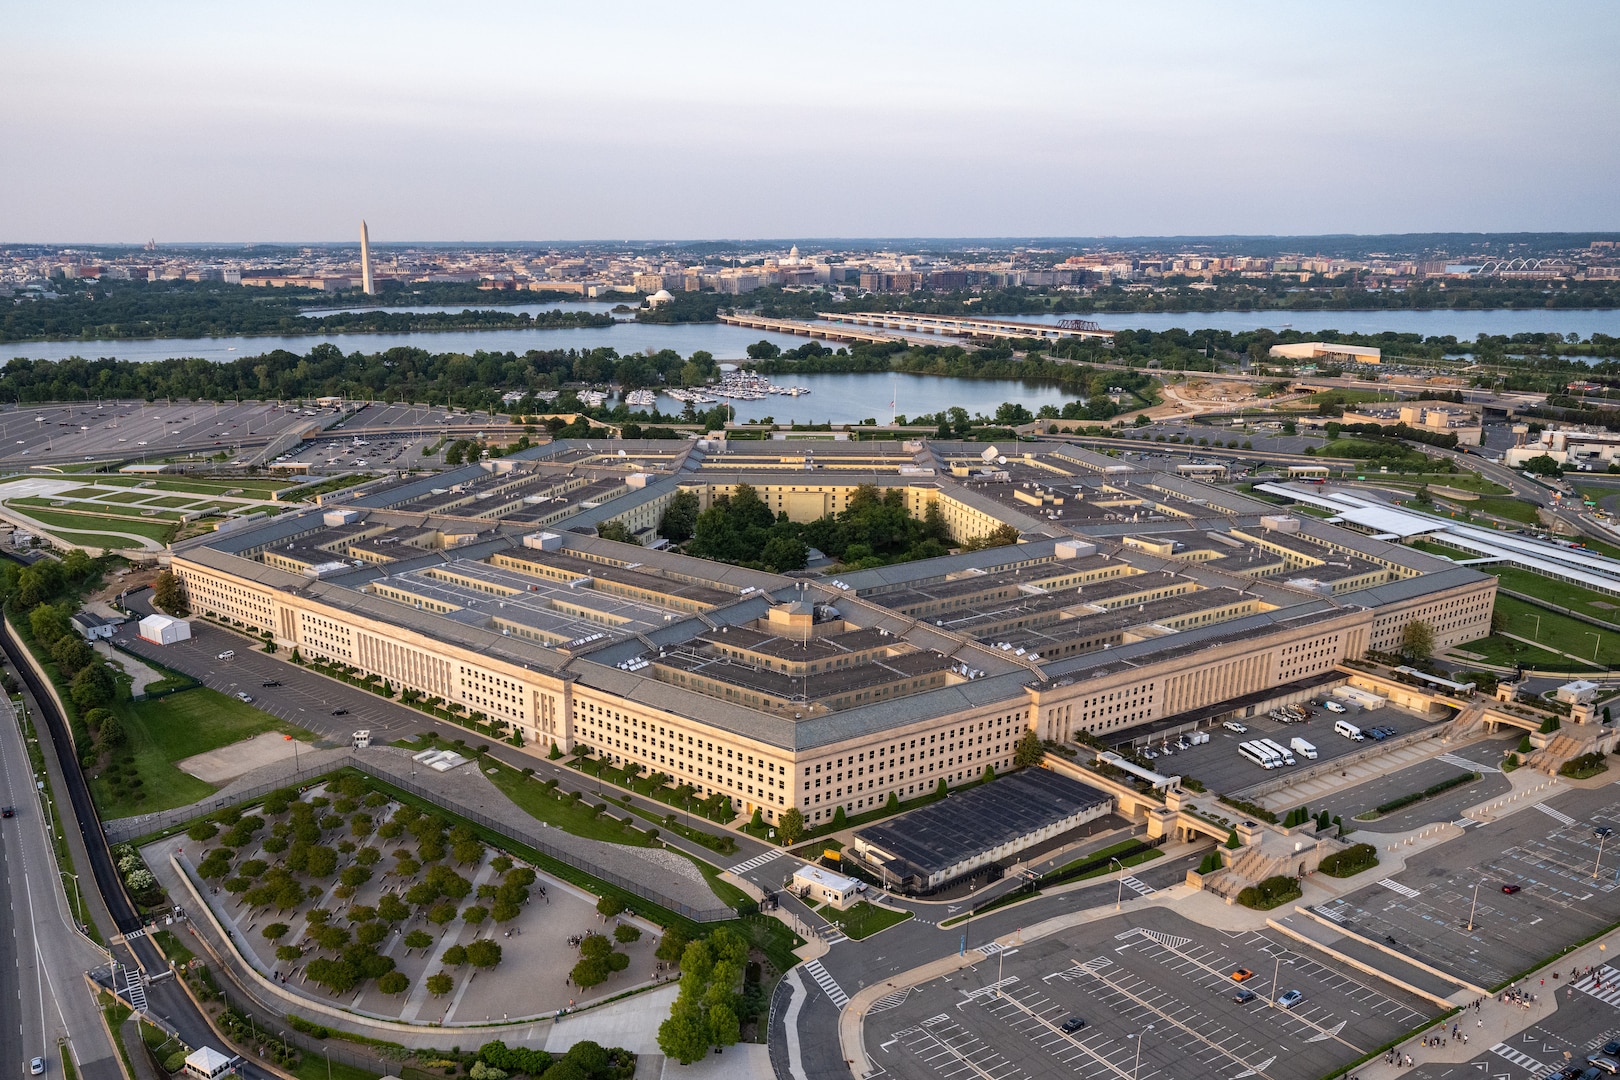 An aerial view of the Pentagon with the Washington Monument in the background.